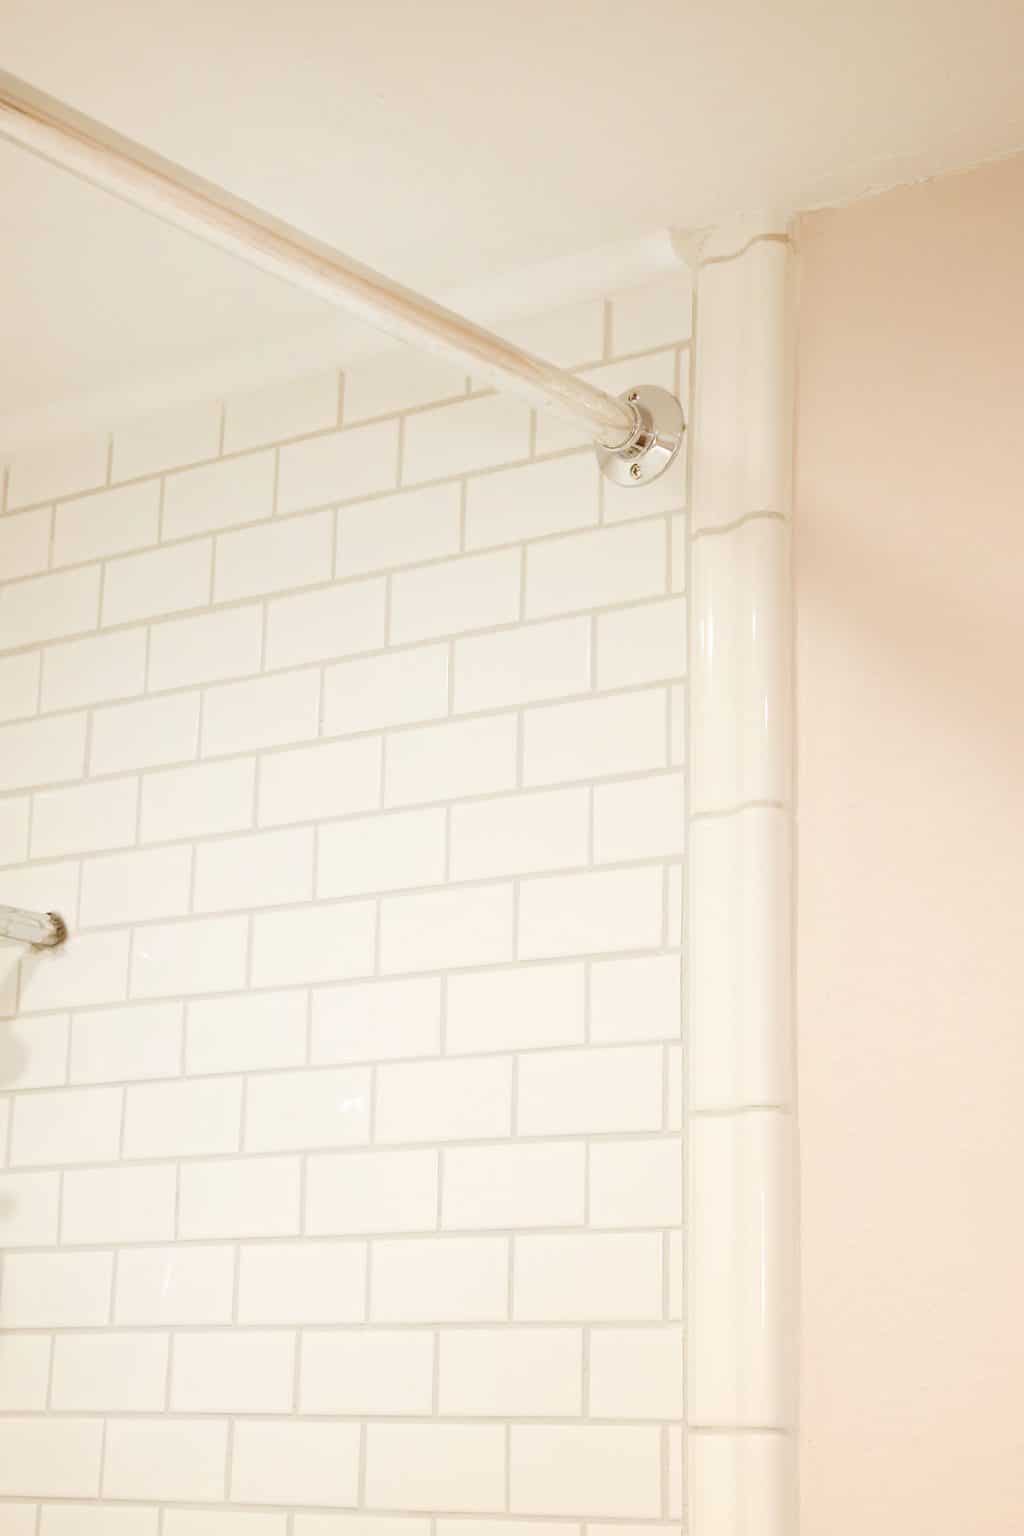 Tile To Hang A Shower Curtain, How To Install A Curved Shower Curtain Rod In Tile